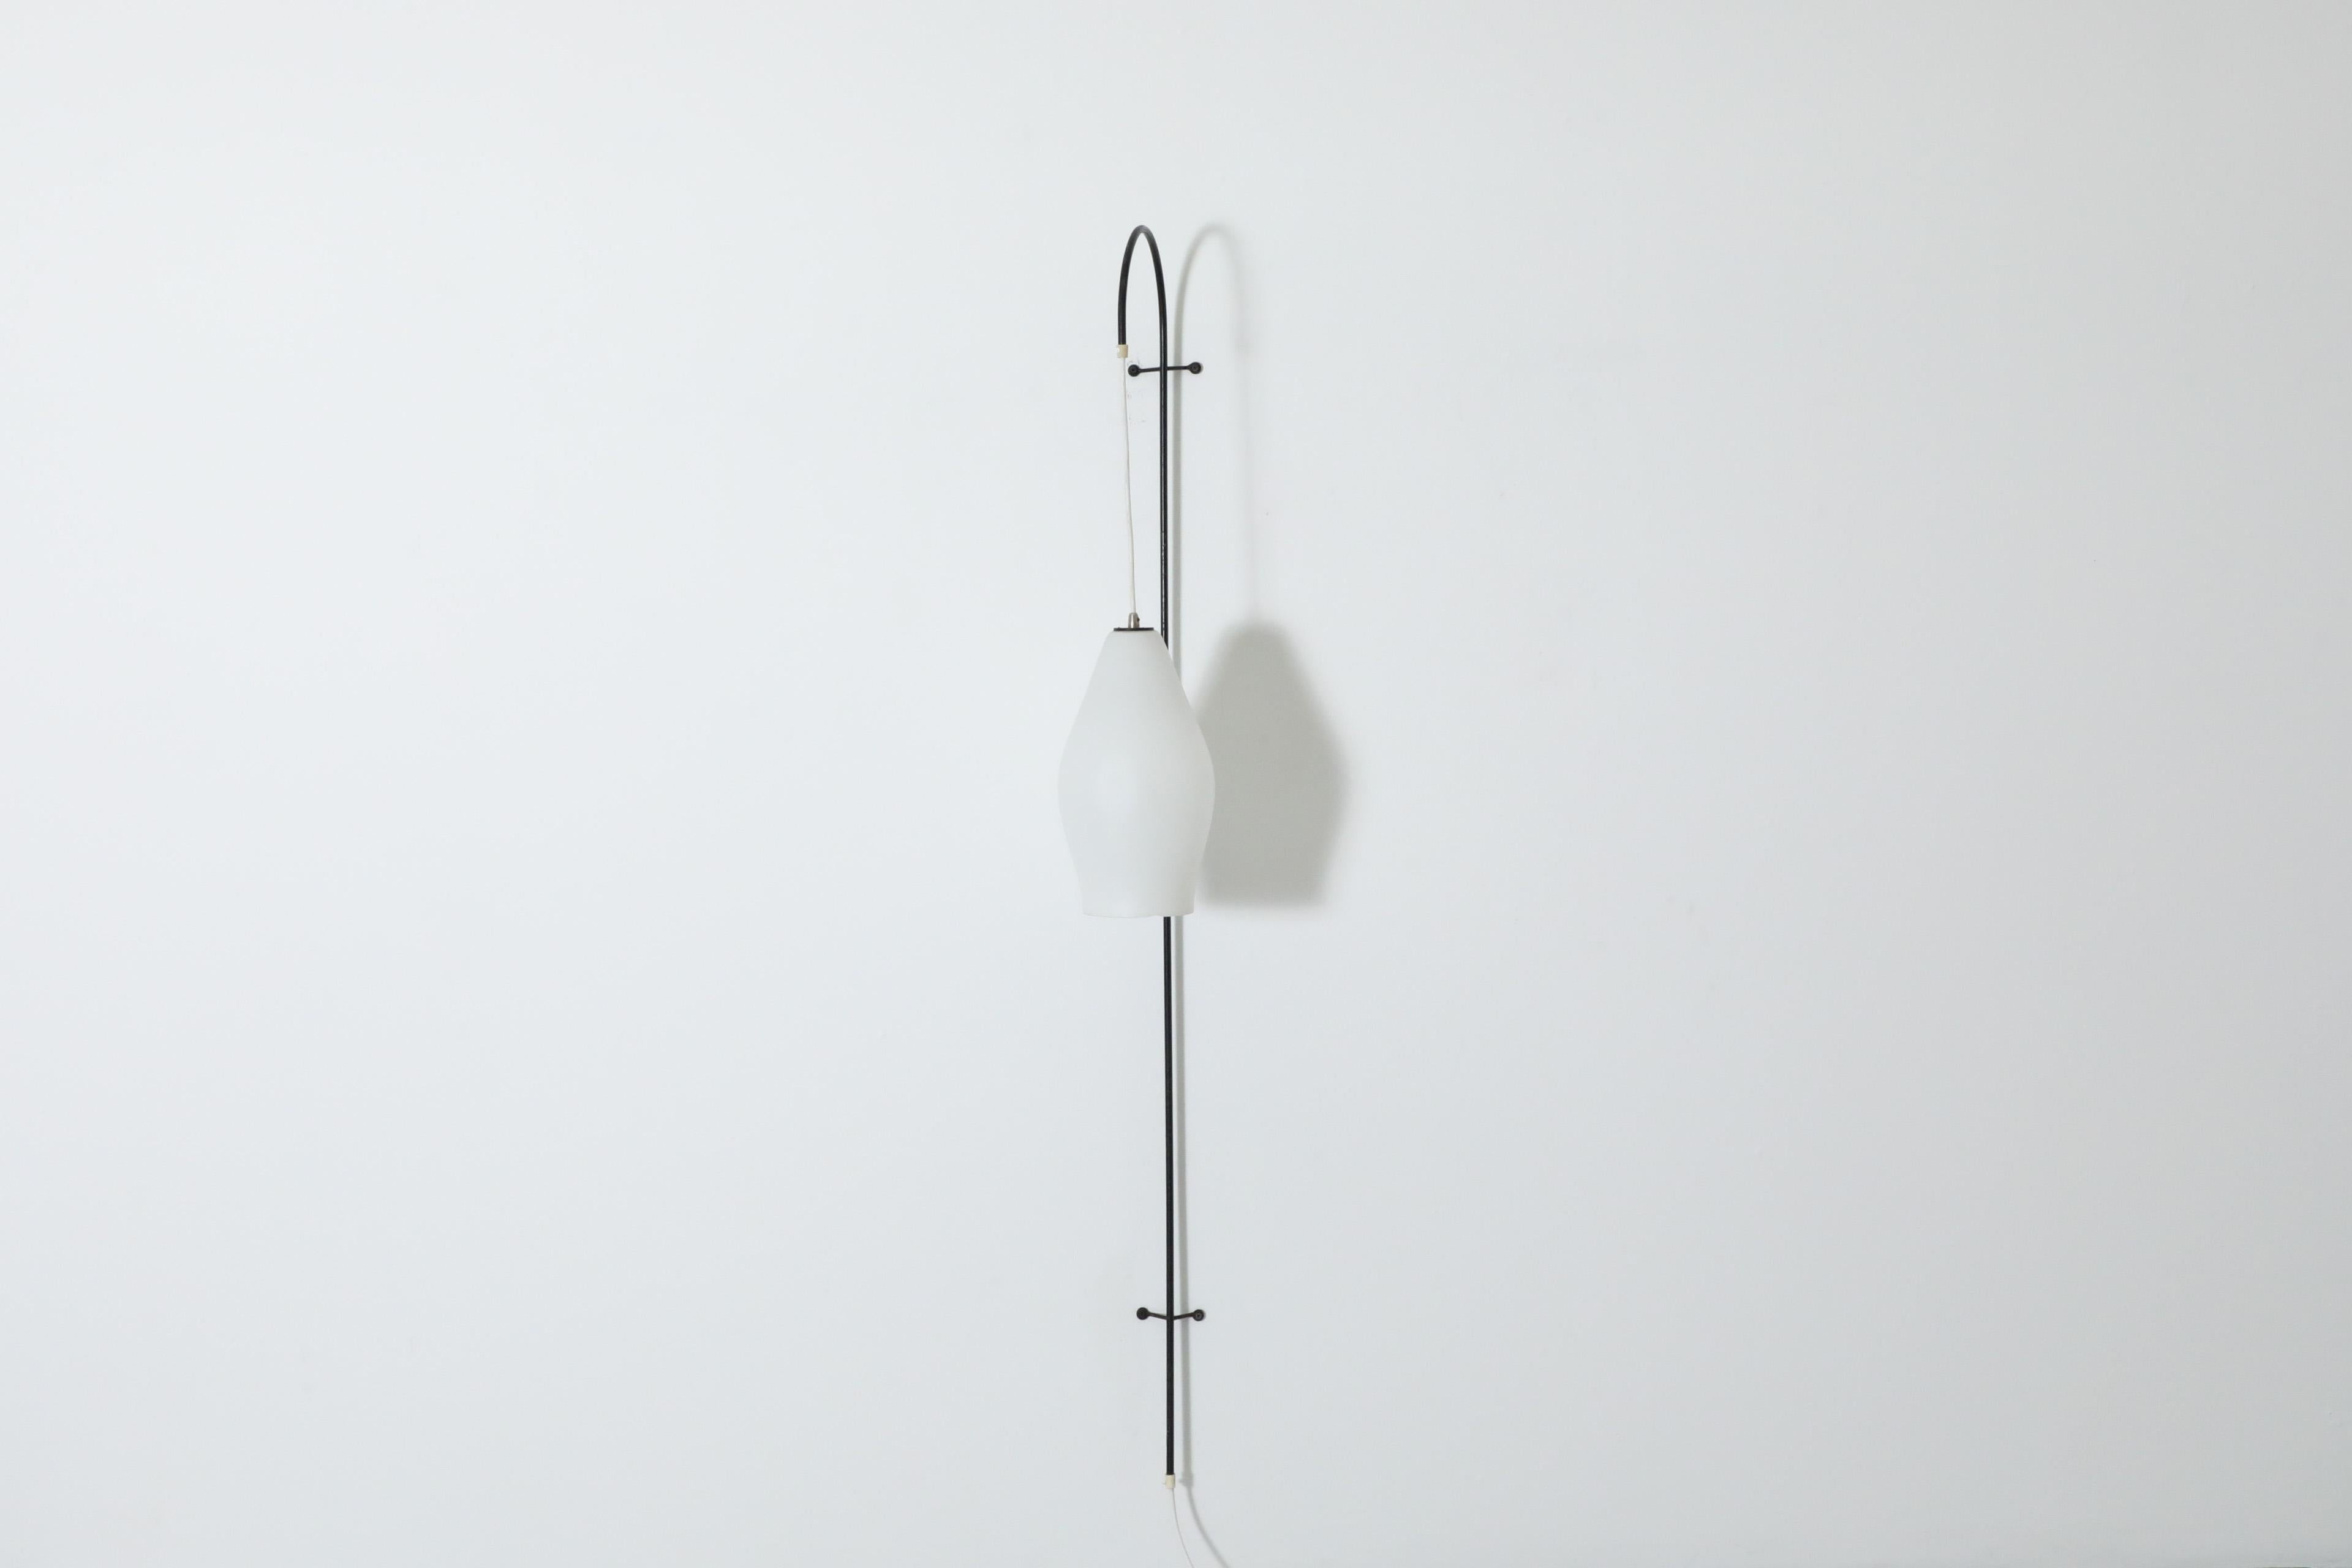 Mid-Century wall mounted fishing pole lamp with hanging milk glass shade pendant. Black metal wire frame with curved milk glass on a white power cord. This minimalistic wall lamp is perfect for a hallway space and provides sufficient directional